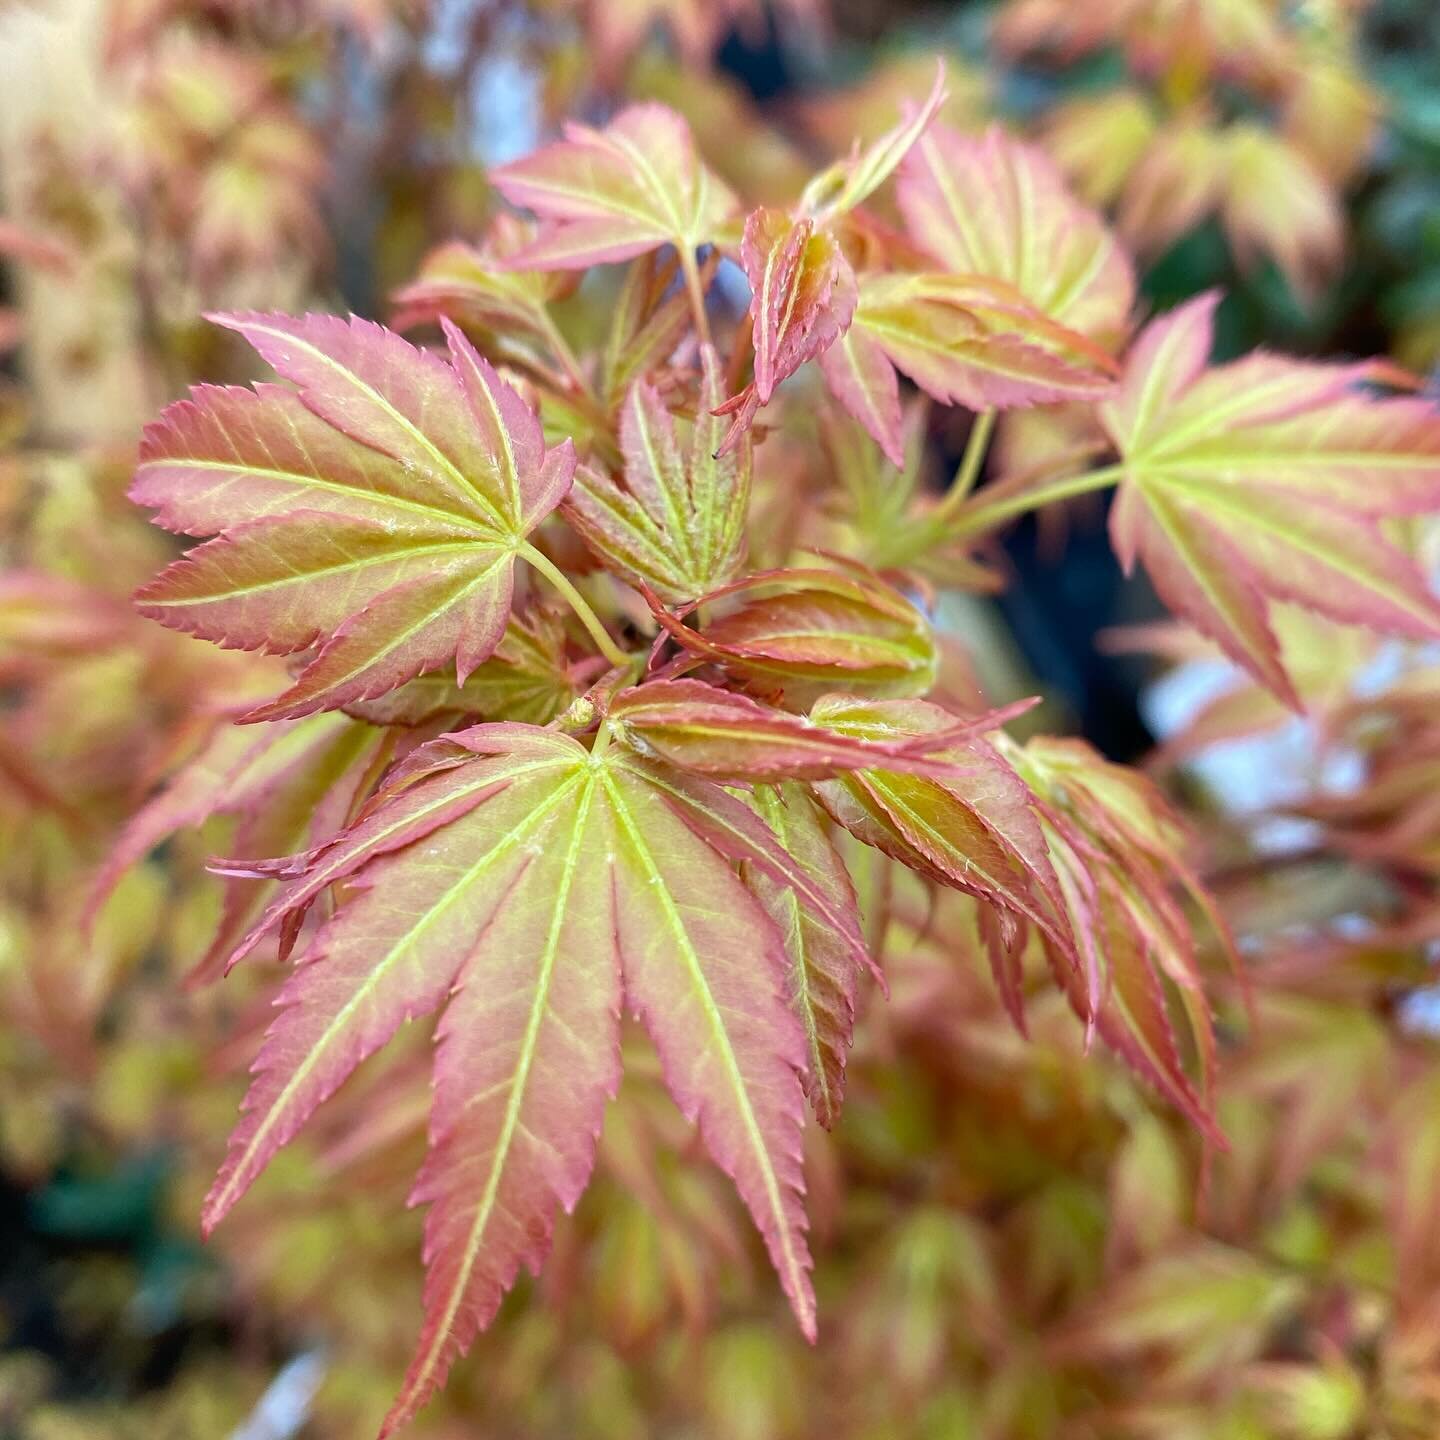 Acer palmatum &lsquo;Katsura&rsquo; 
Always the first of the Japanese Maples to come into leaf.
🍁 😍 🍁
#millgardencentre #acerpalmatum #plantsofinstagram #garden #gardeninspiration #plantsmakepeoplehappy